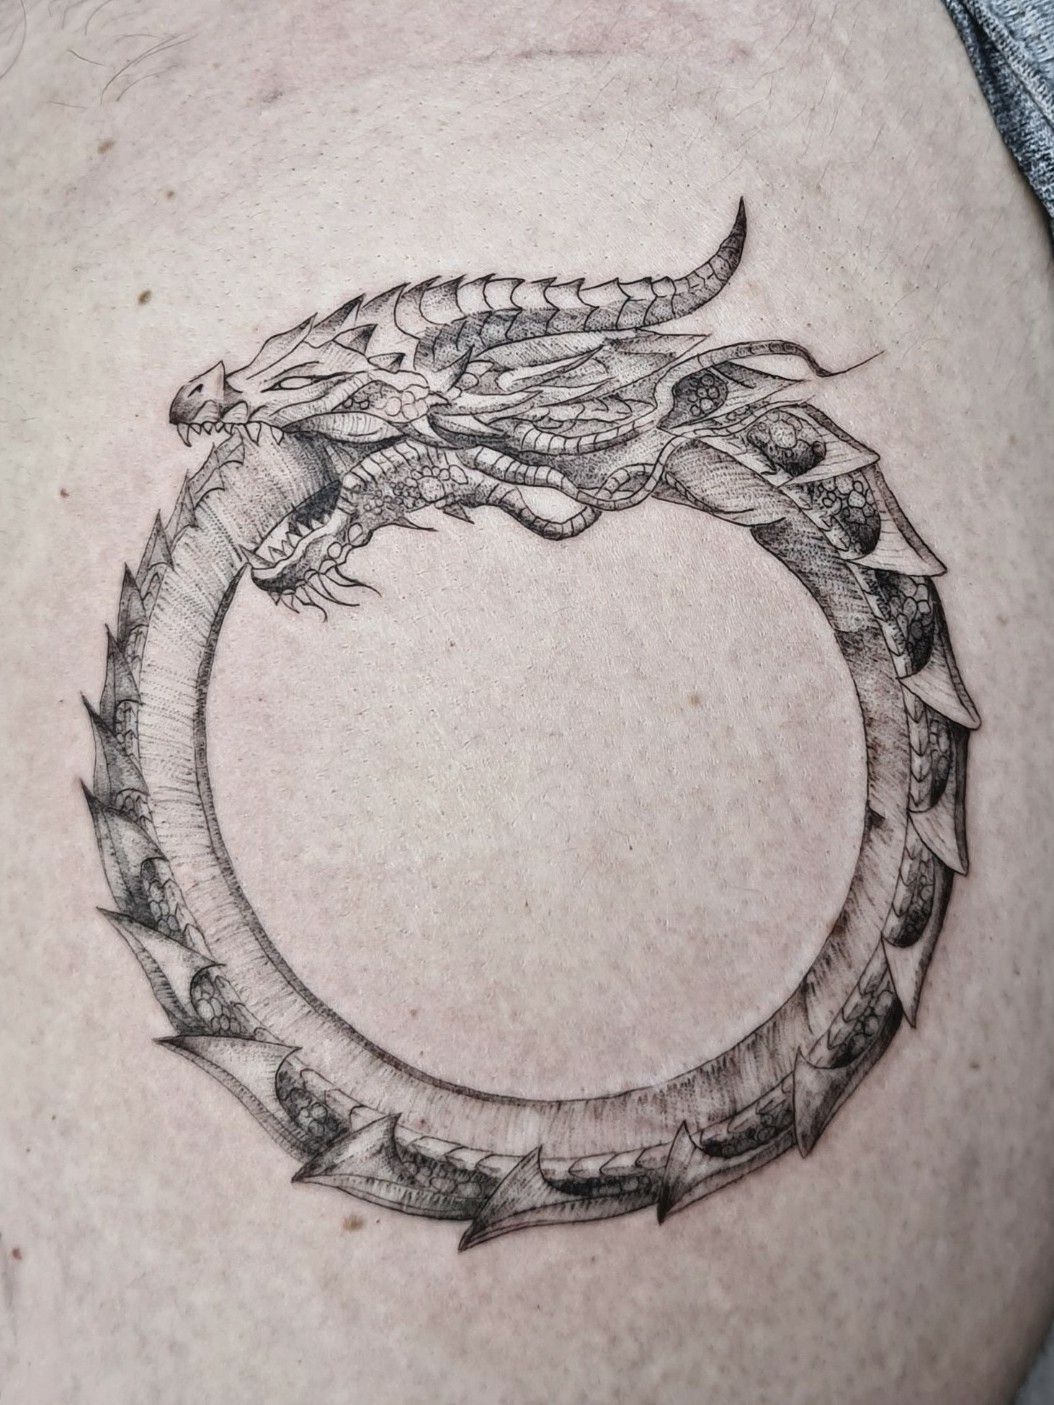 48 Stunning Ouroboros Tattoos with Meaning  Our Mindful Life